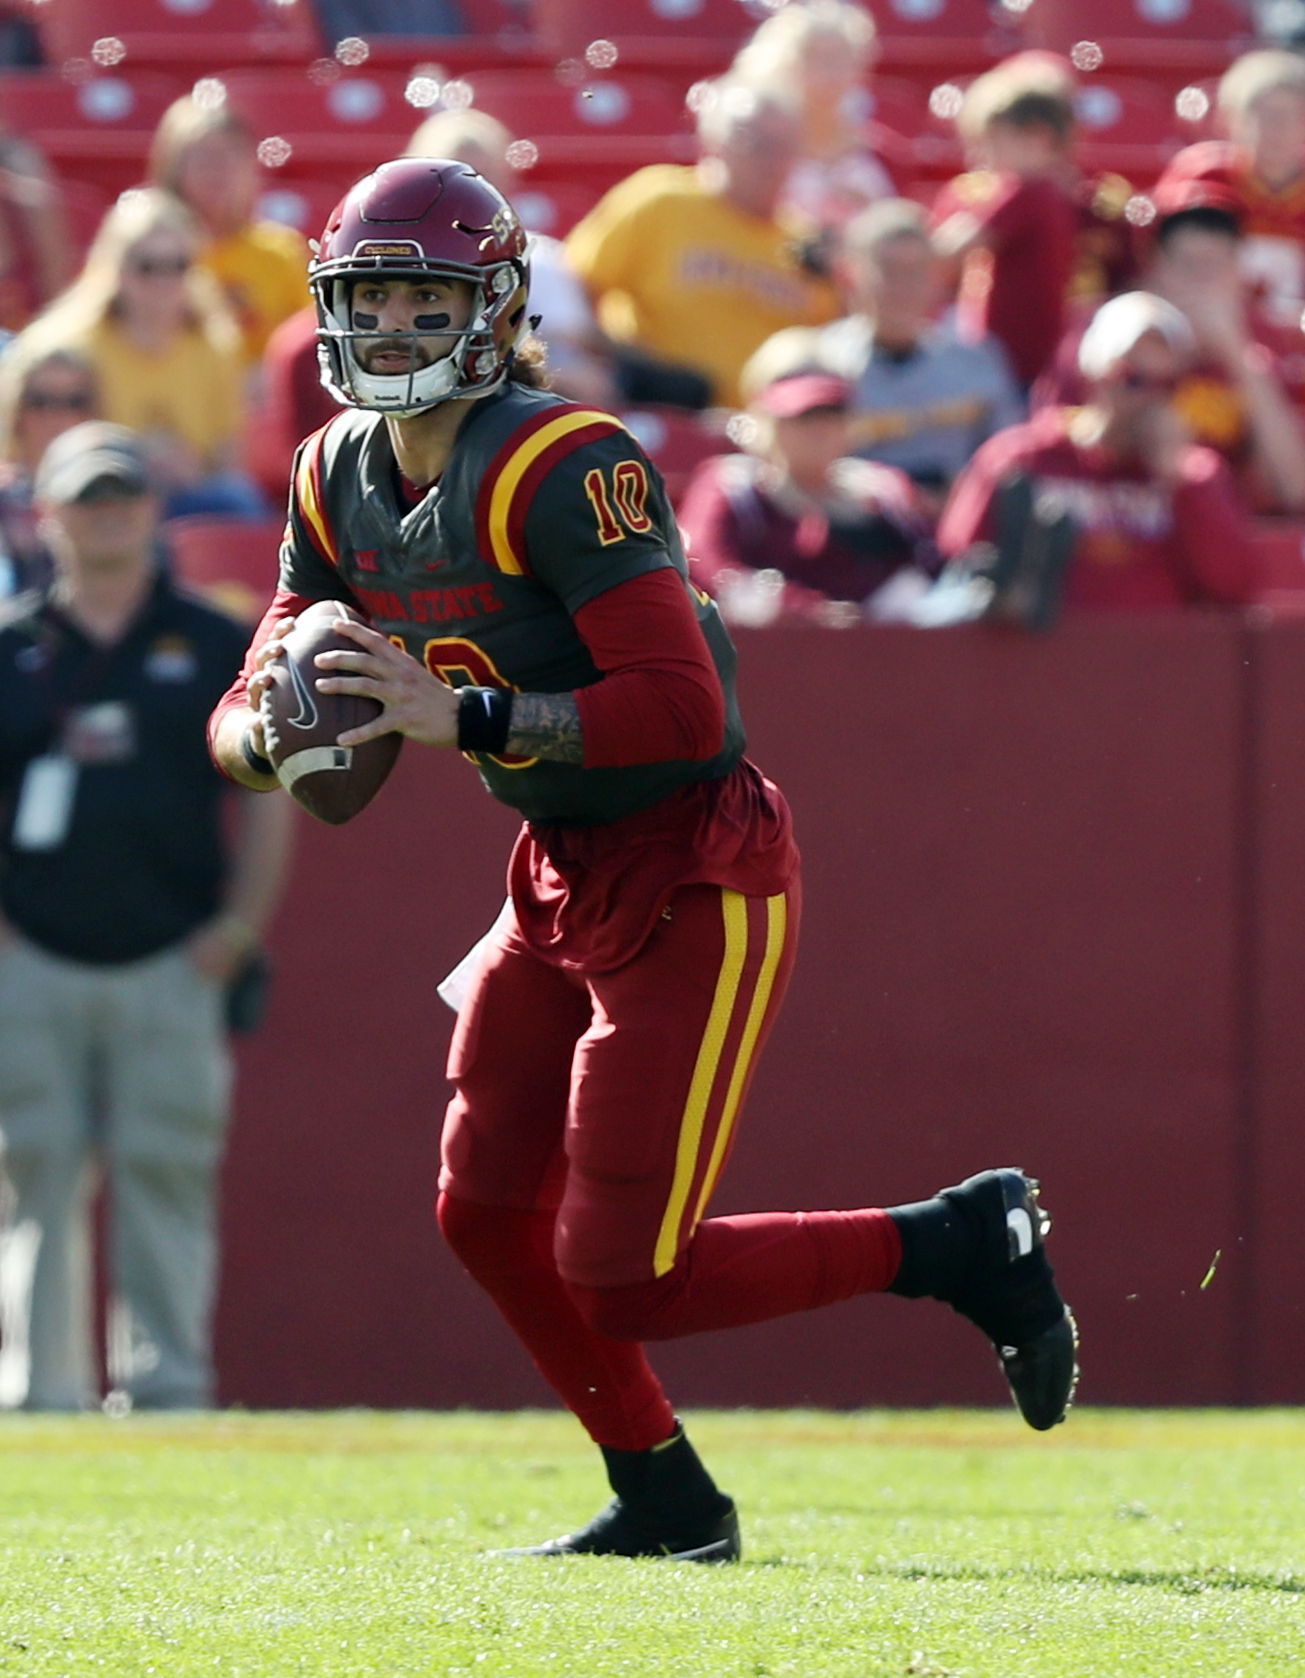 Oct 29, 2016; Ames, IA, USA; Iowa State Cyclones quarterback Jacob Park (10) looks to pass against the Kansas State Wildcats at Jack Trice Stadium. Mandatory Credit: Reese Strickland-USA TODAY Sports